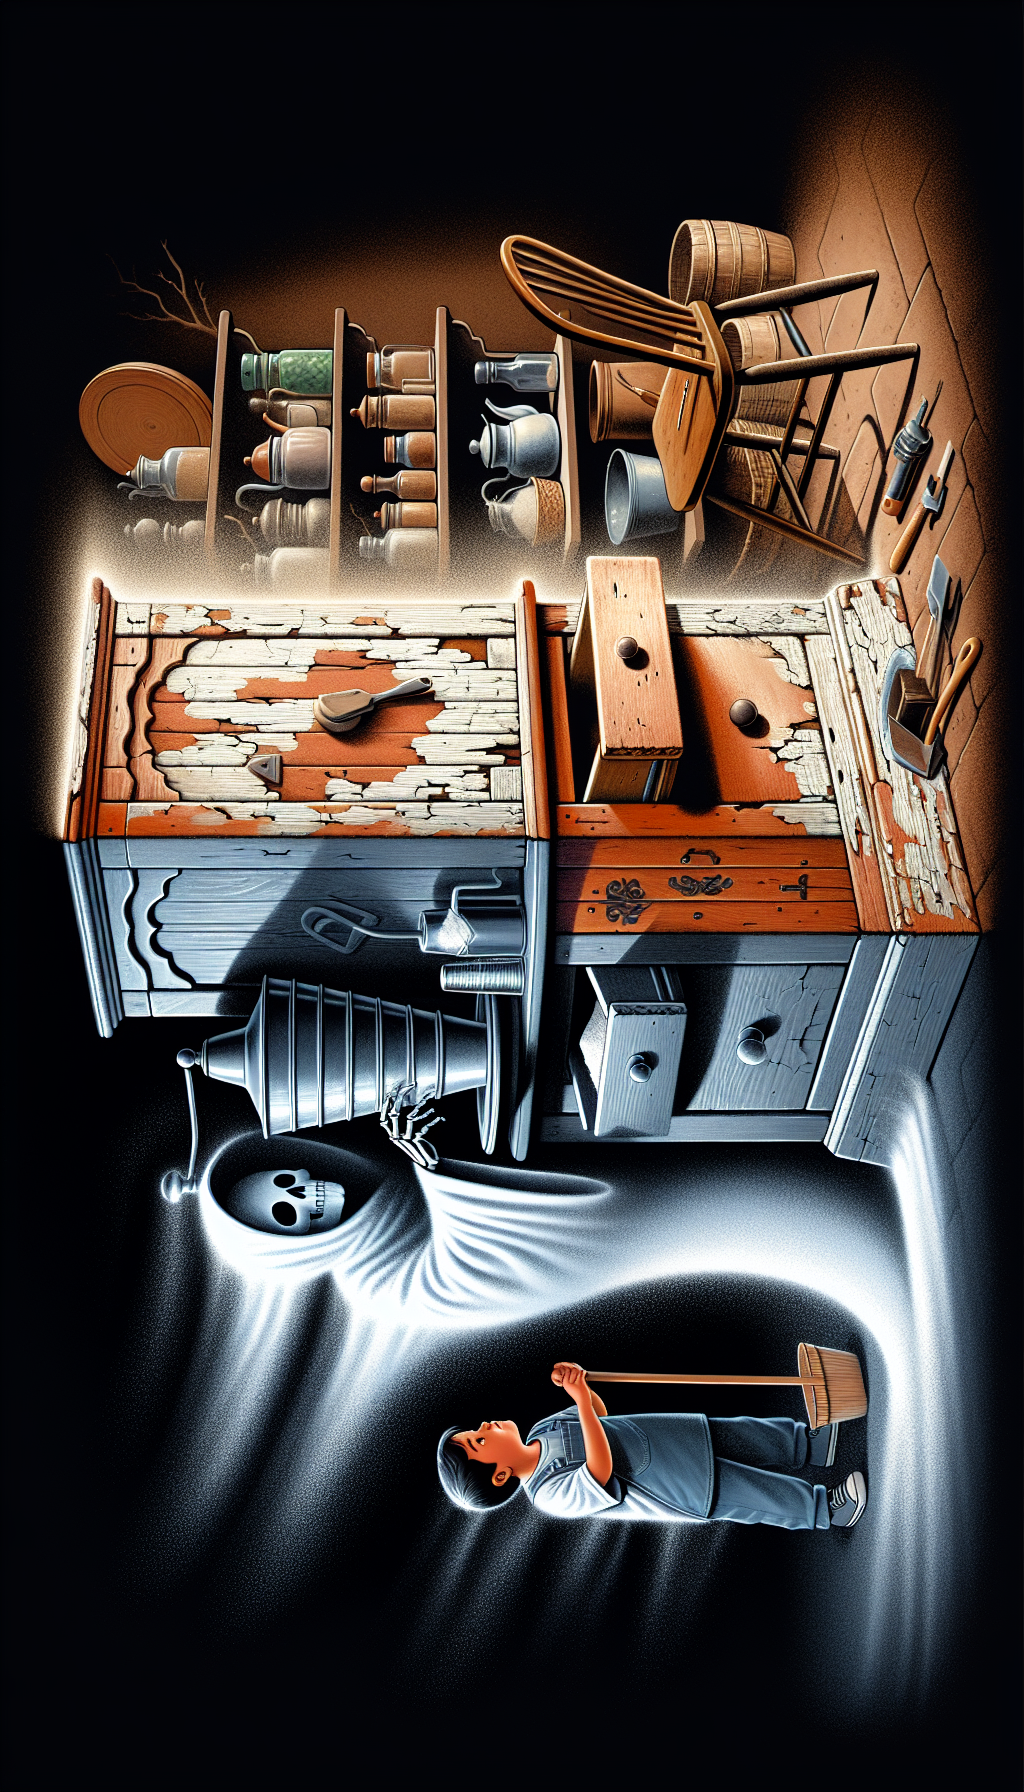 An illustration merging the past and future—half the Hoosier cabinet appears worn and tarnished, the other half restored to its original glory. A ghostly craftsman, tools in hand, works to preserve the cabinet, while a child peeks from behind, symbolizing future generations. A shining flour sifter is prominent, subtly reflecting its high antique value amidst the restoration process.